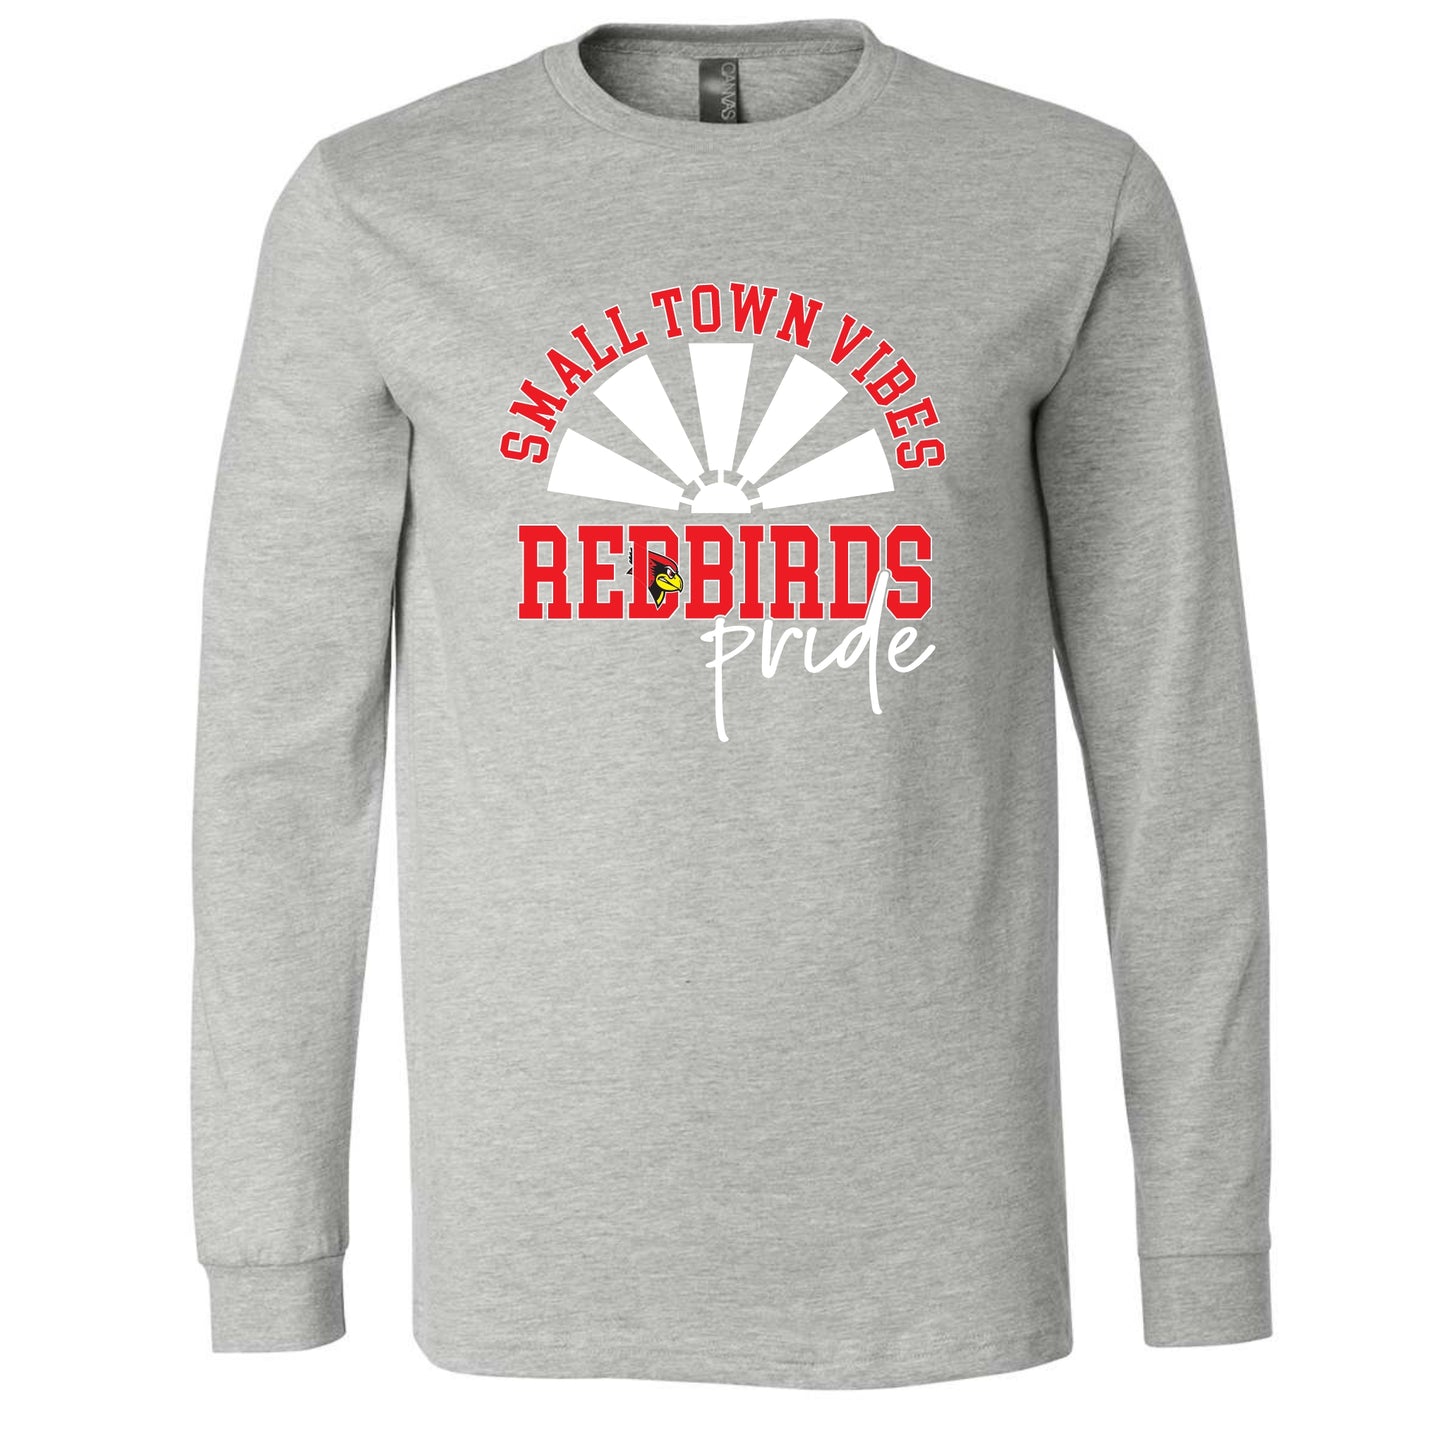 Small Town Vibes Bella+Canvas Premium Long Sleeve Tee